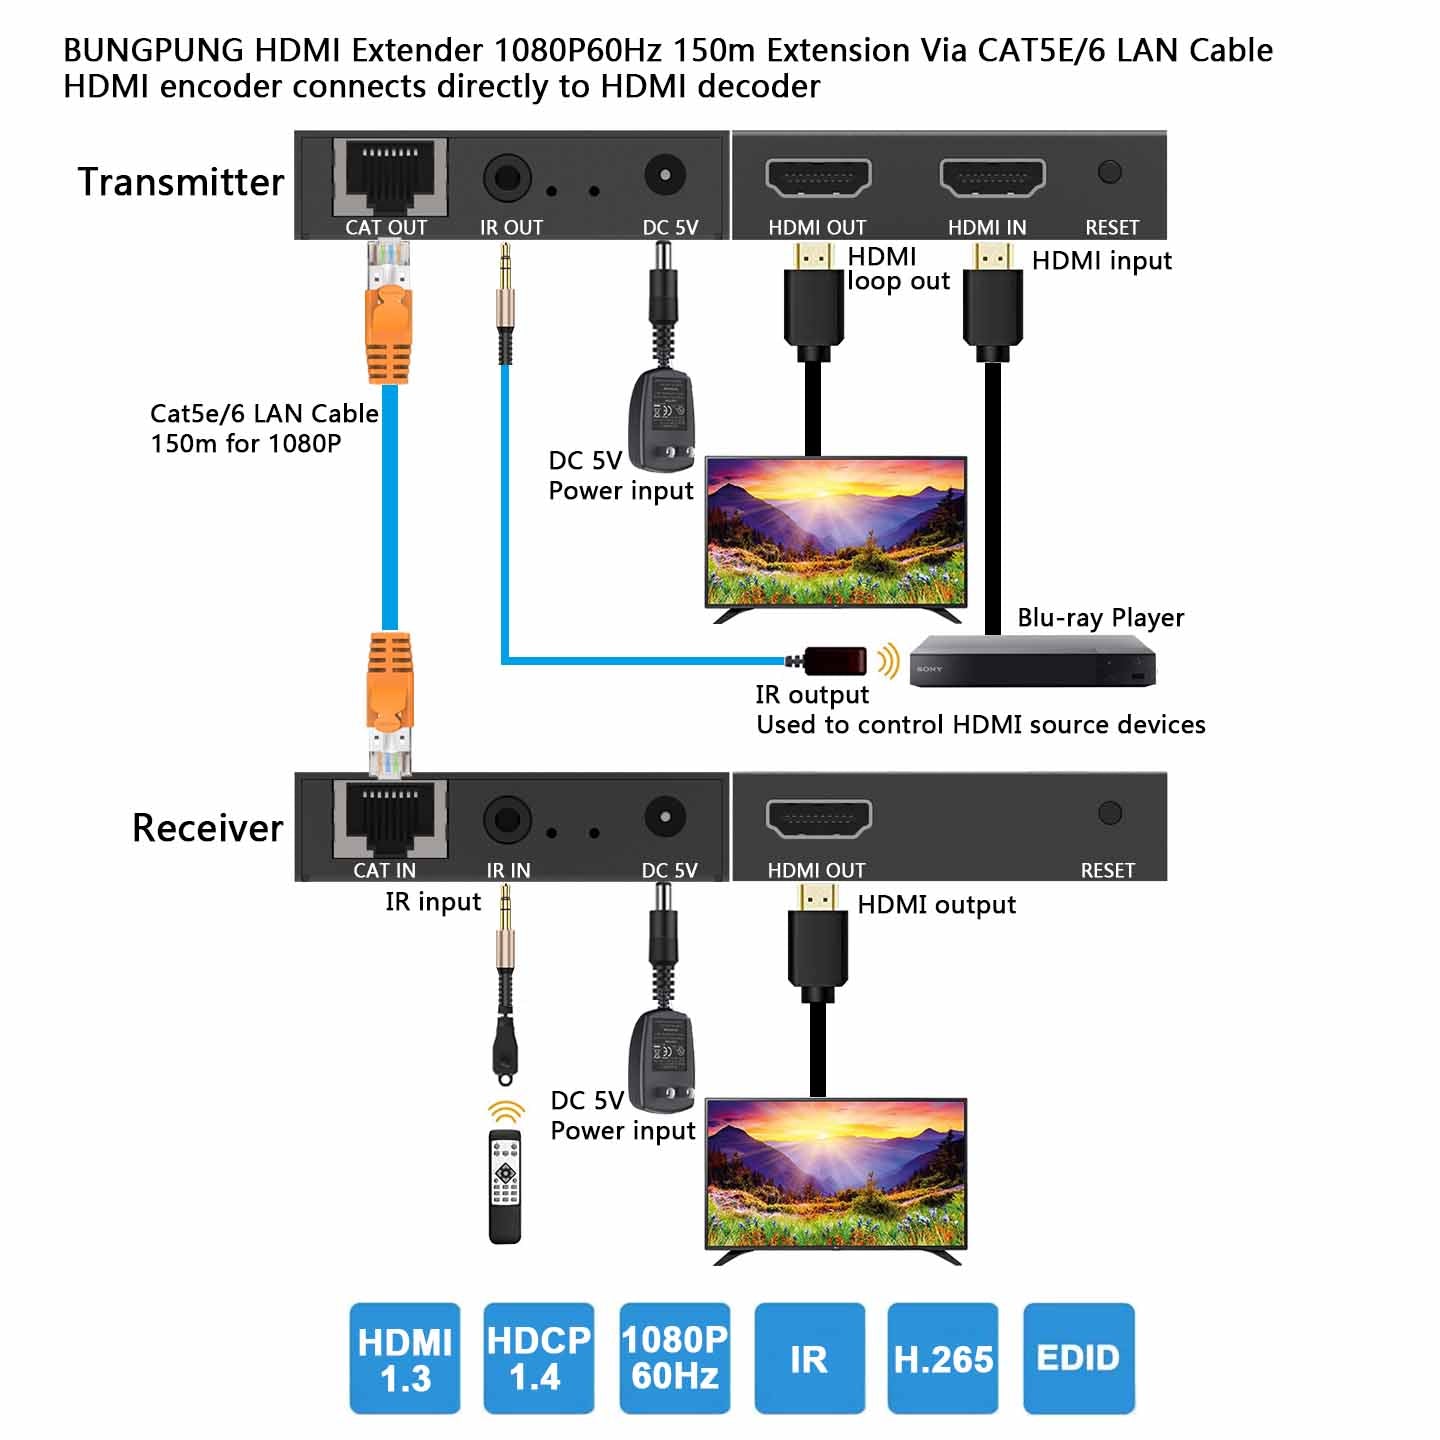 HDMI Extender over IP Ethernet CAT5e/6 Cable 1080P 60Hz 150m 1 to 1 connection